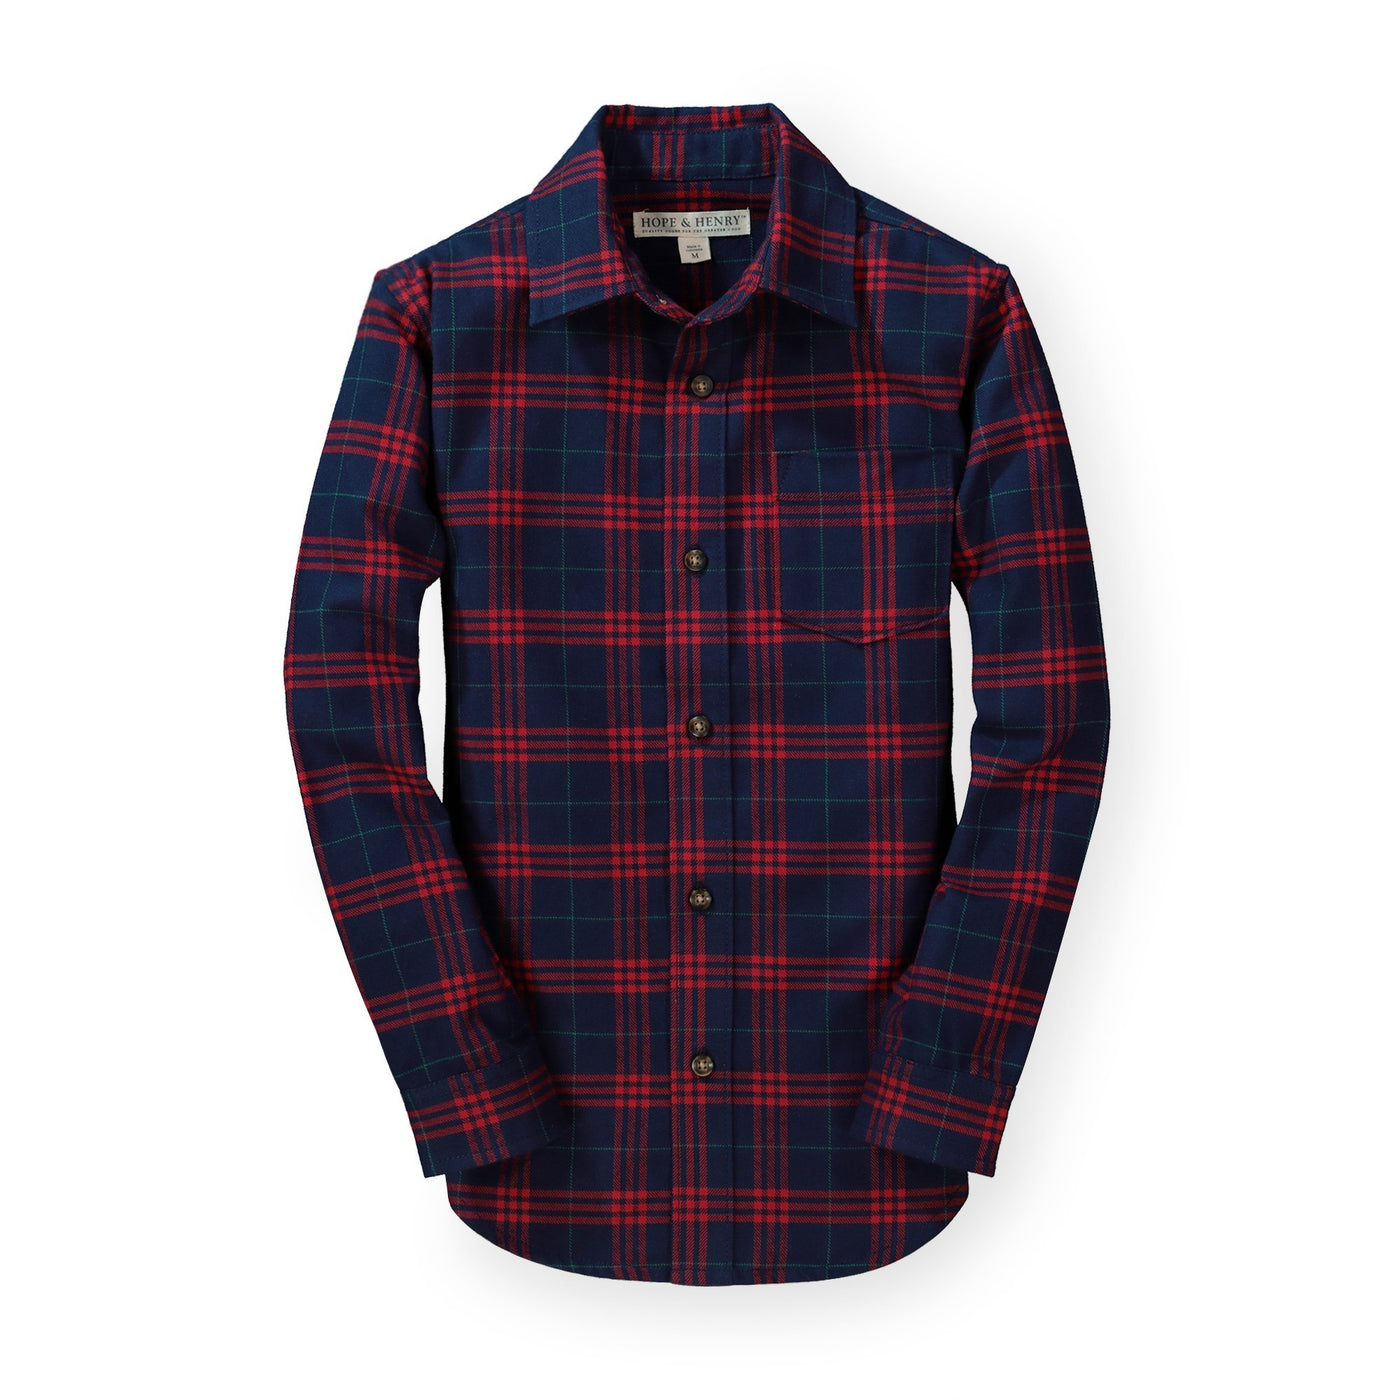 Brushed Flannel Button Down Shirt | Hope & Henry Boy